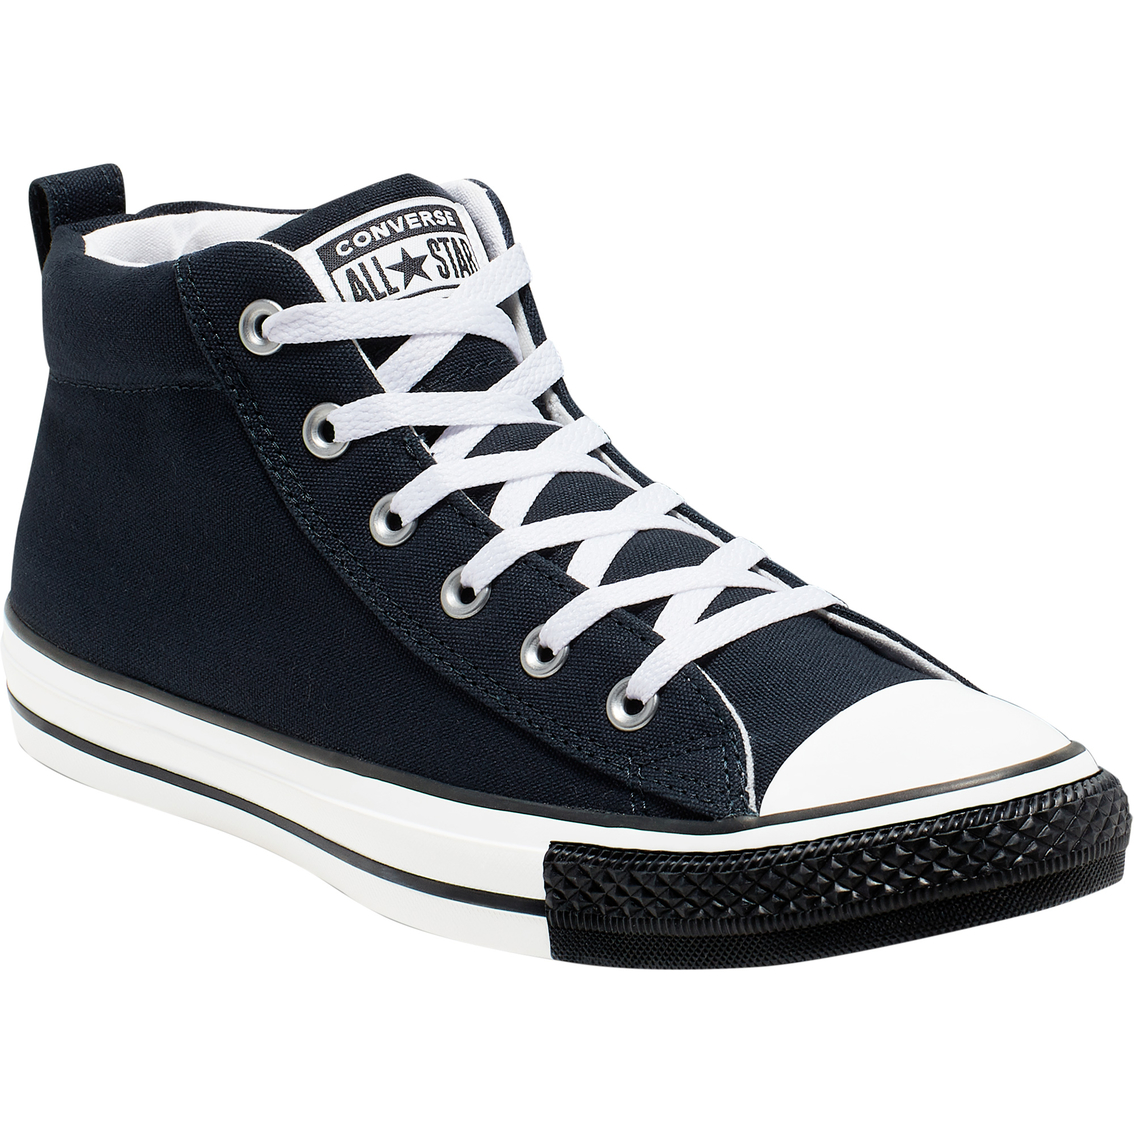 Converse Men's Chuck Taylor All Star High Street Sneakers | Sneakers ...